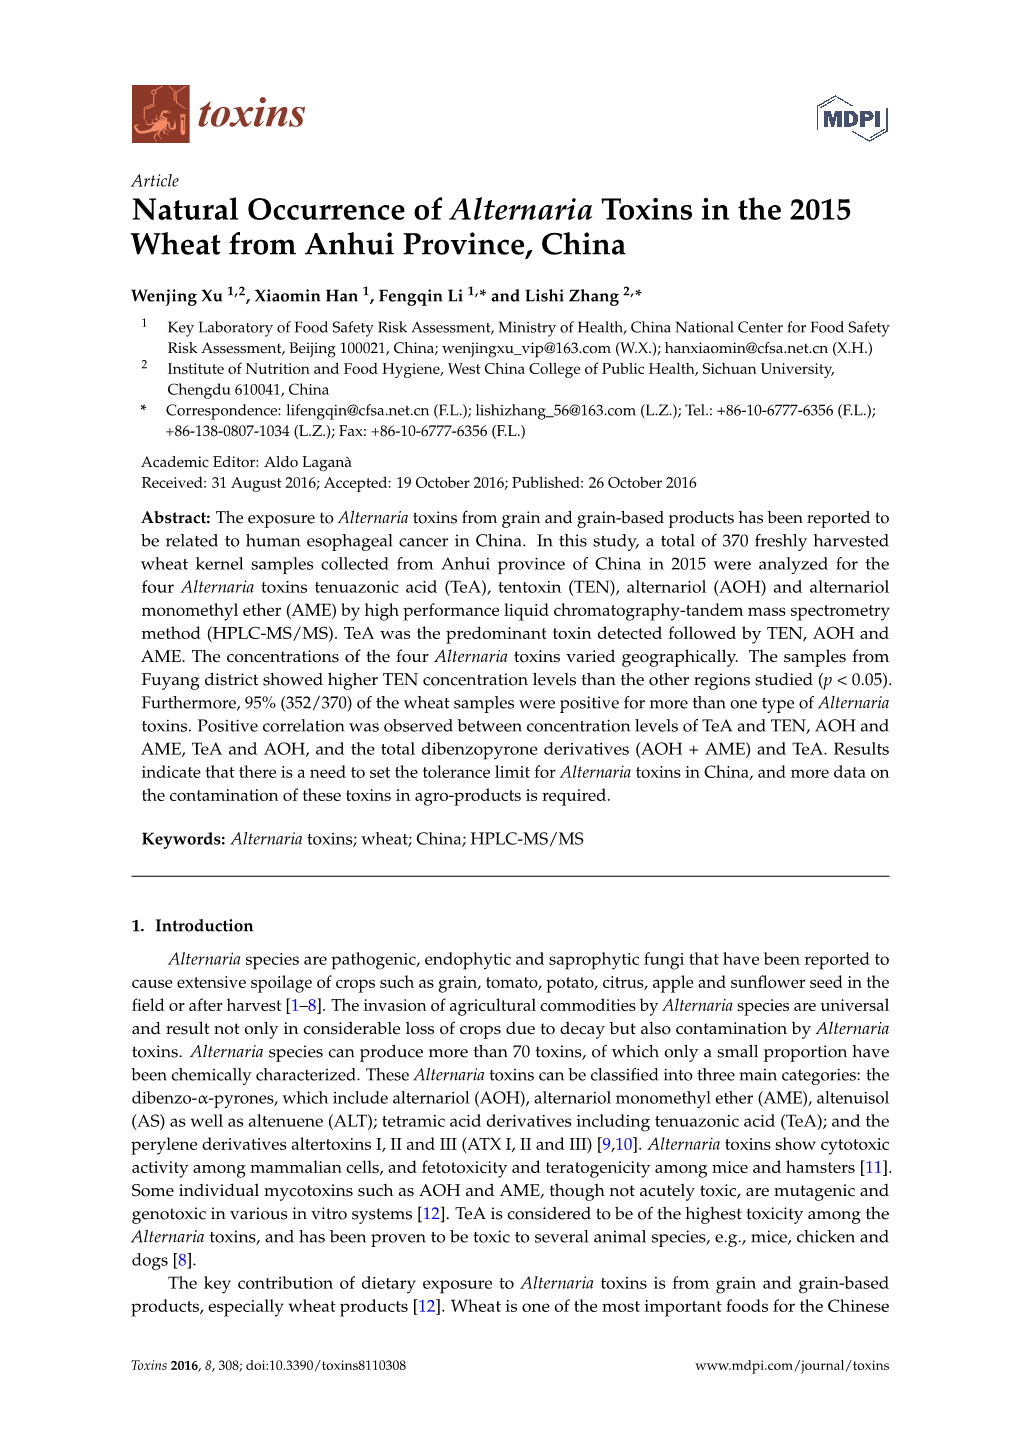 Natural Occurrence of Alternaria Toxins in the 2015 Wheat from Anhui Province, China